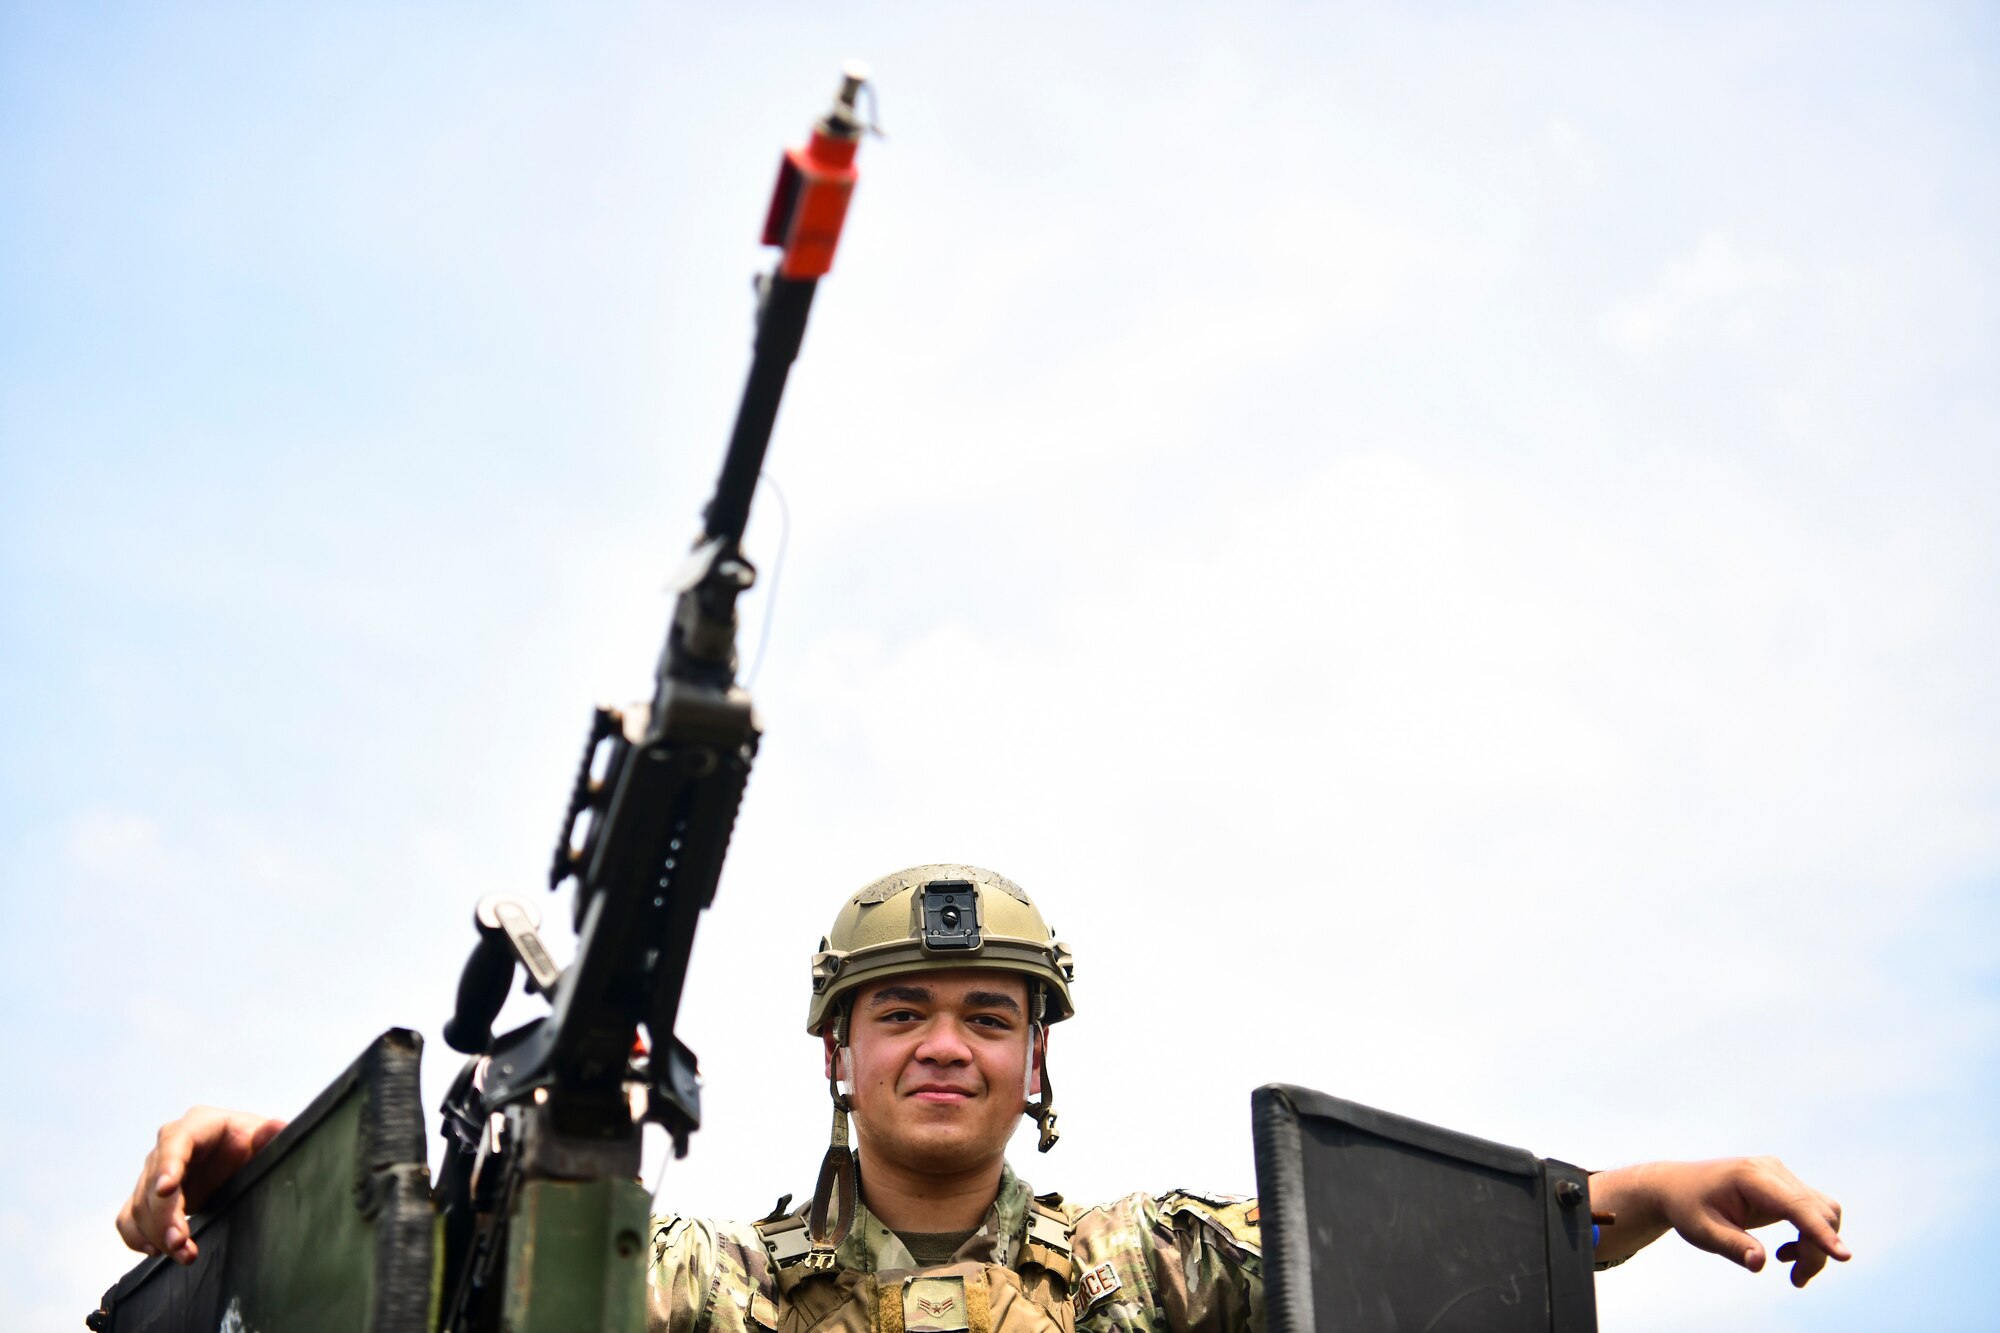 An Airman perches on top of a Humvee.